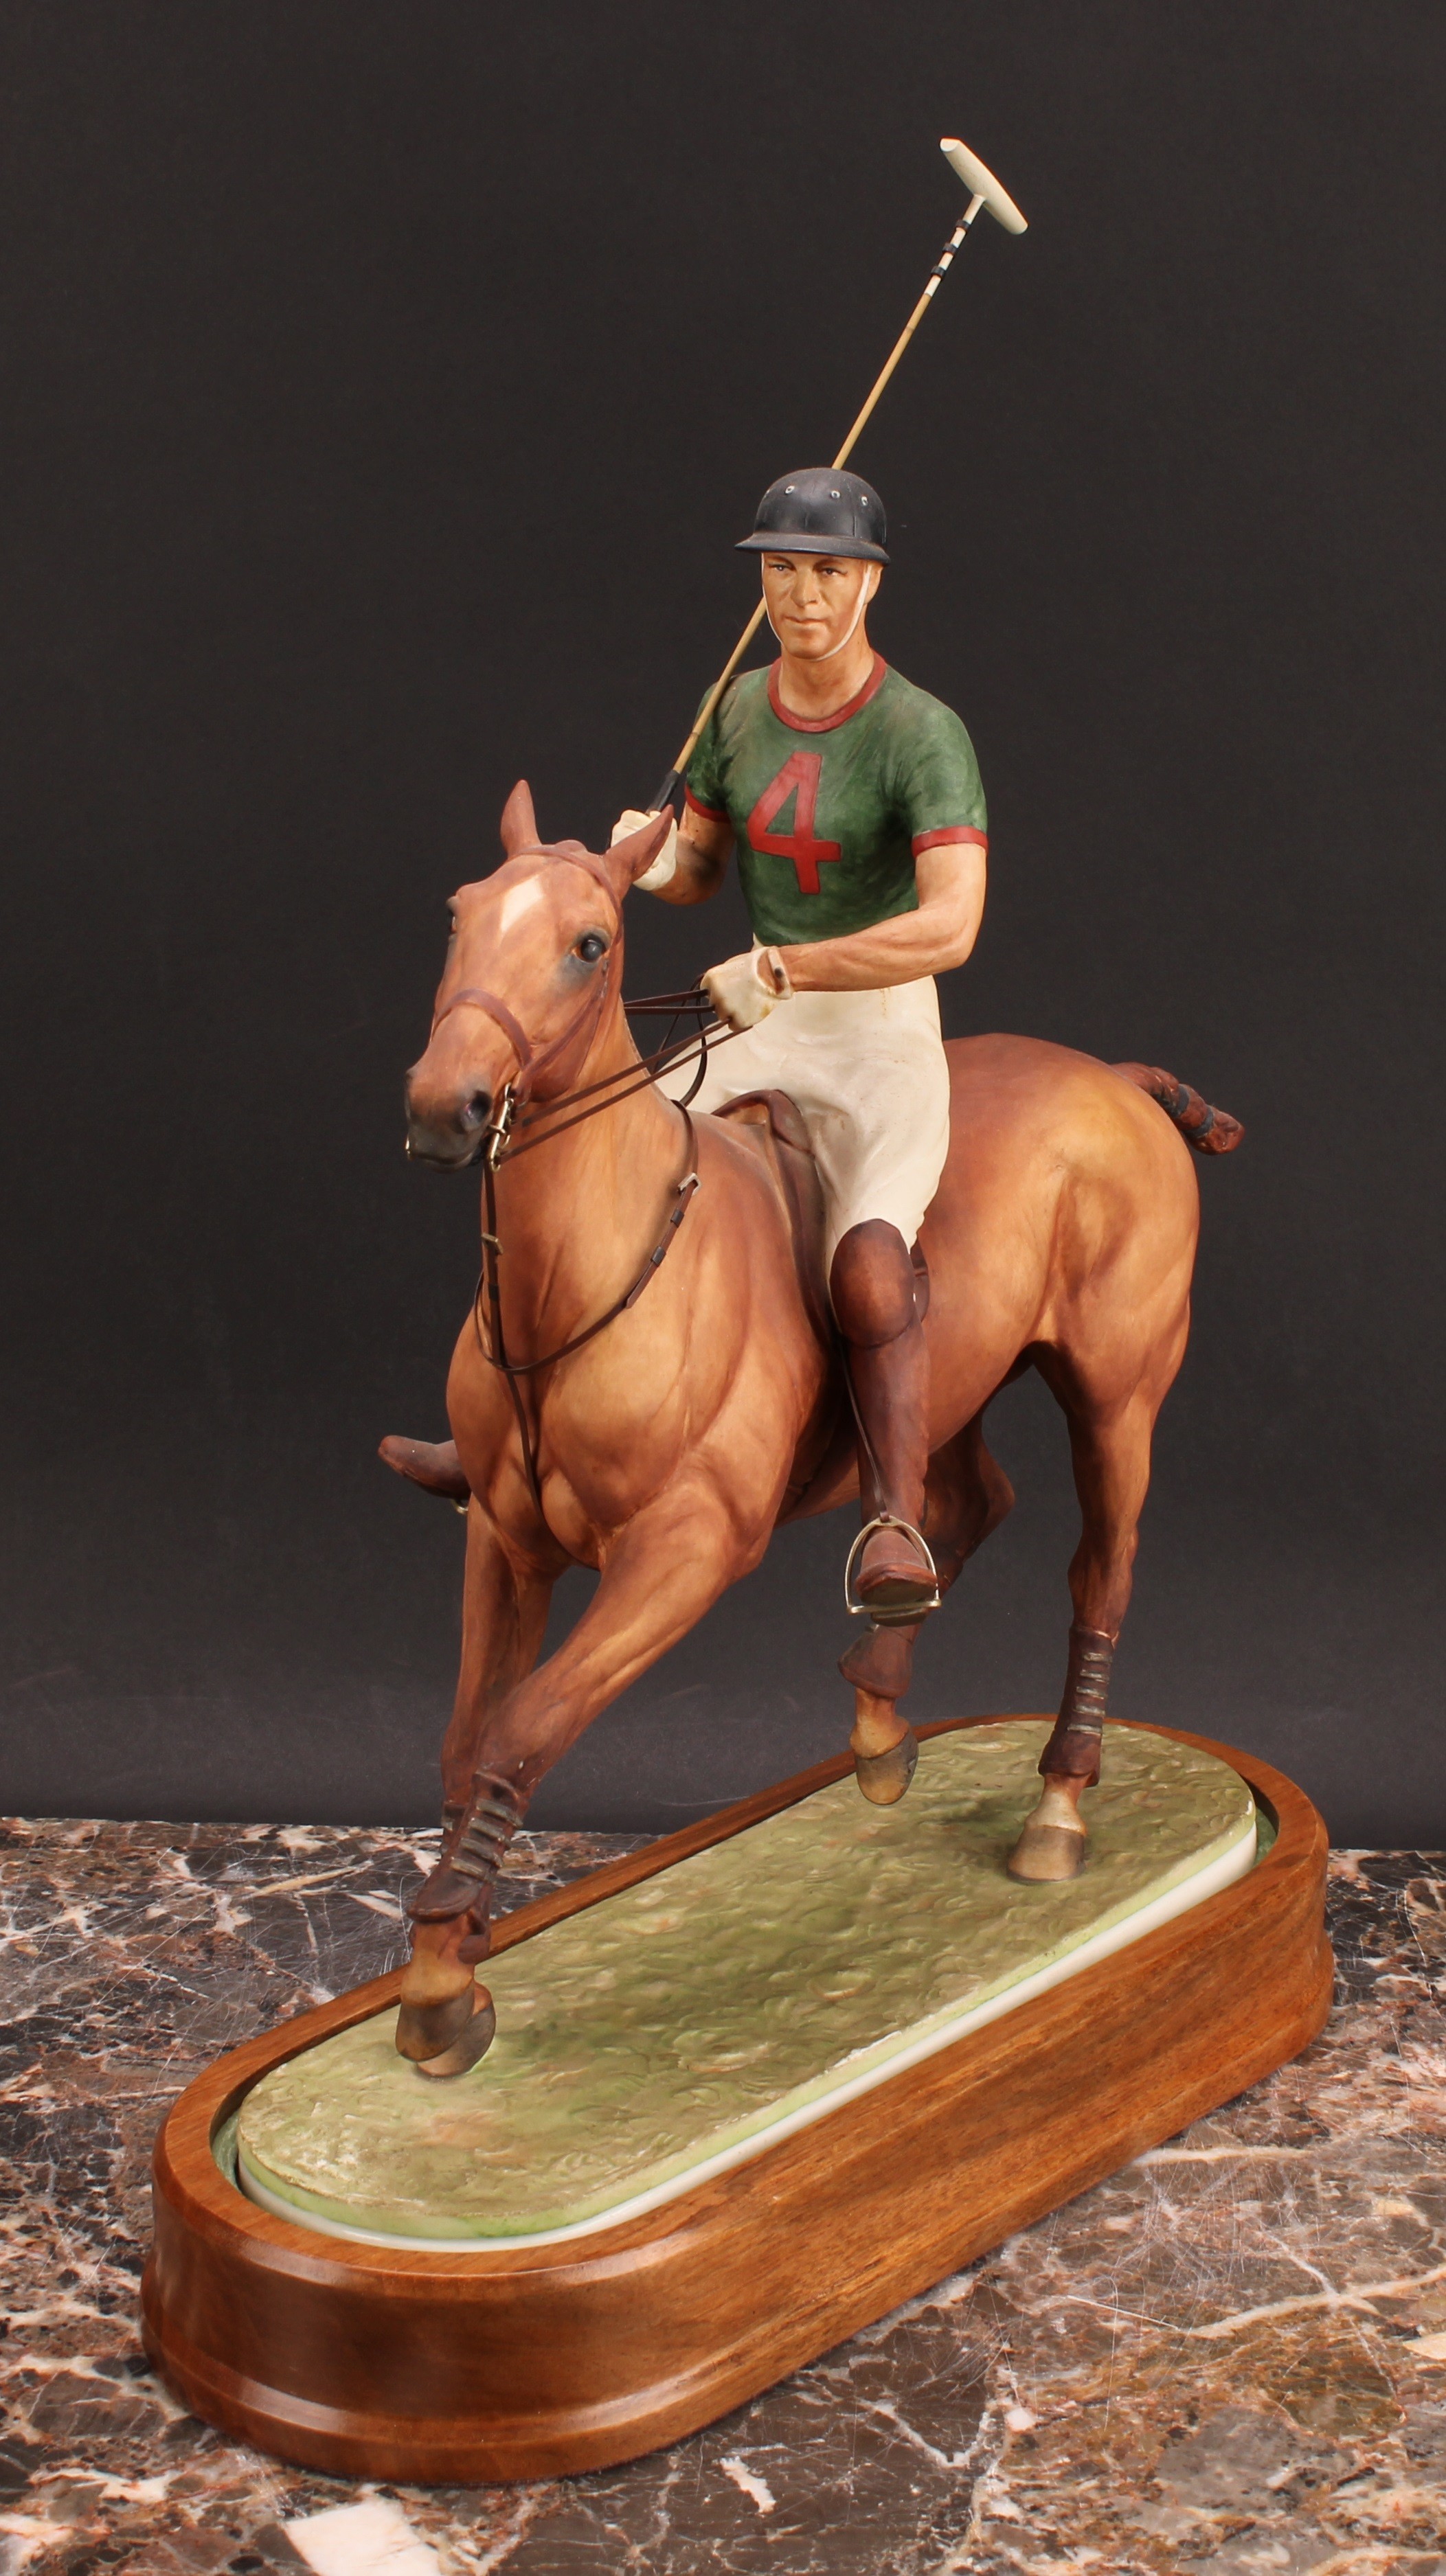 A Royal Worcester equestrian figure, H.R.H The Duke of Edinburgh, playing polo, limited edition no. - Image 3 of 4